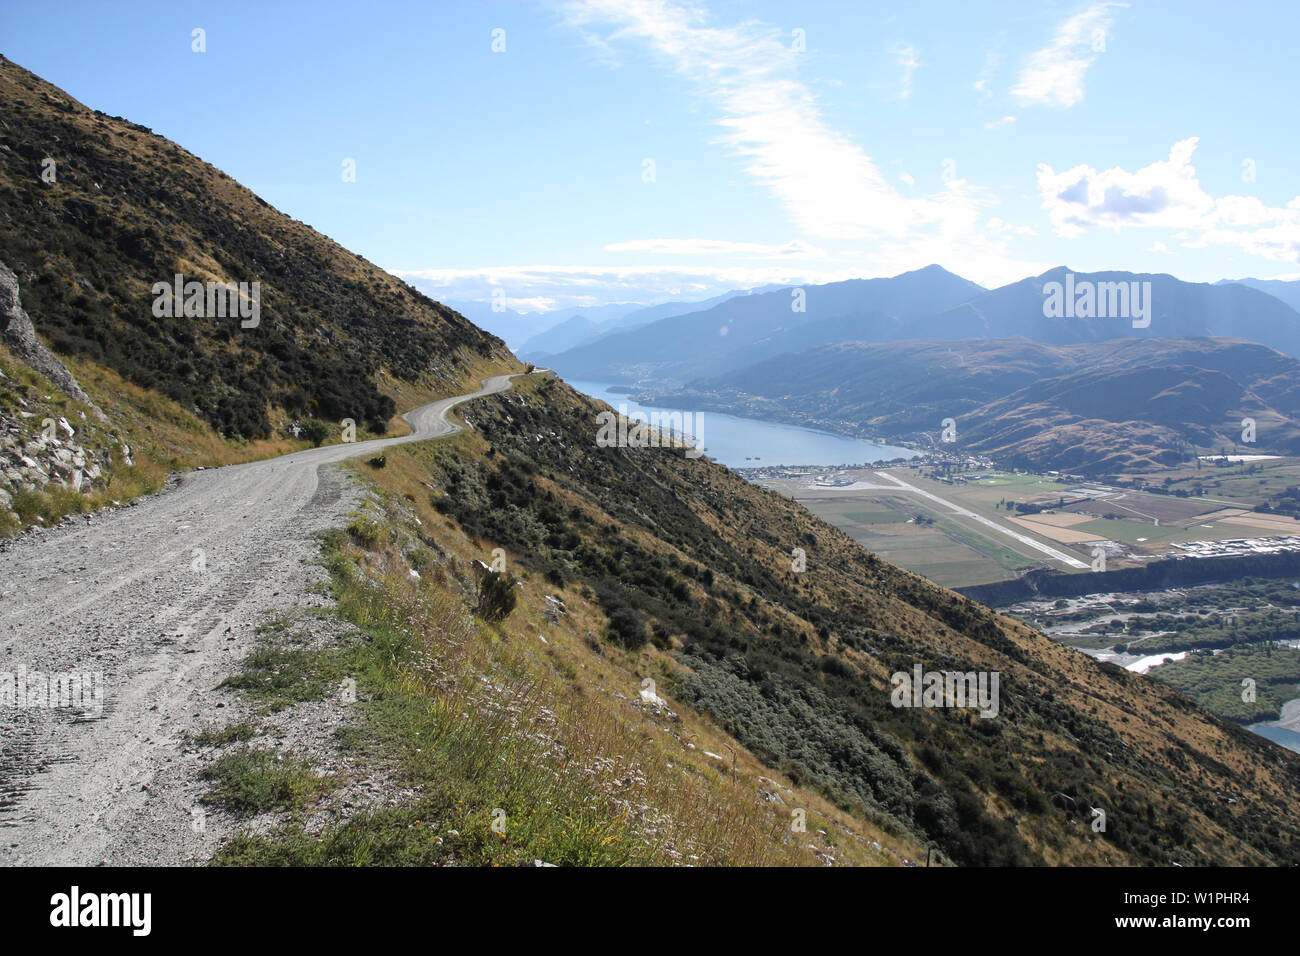 The Remarkables gravel road. Mountains in New Zealand's Otago region. South Island. Stock Photo